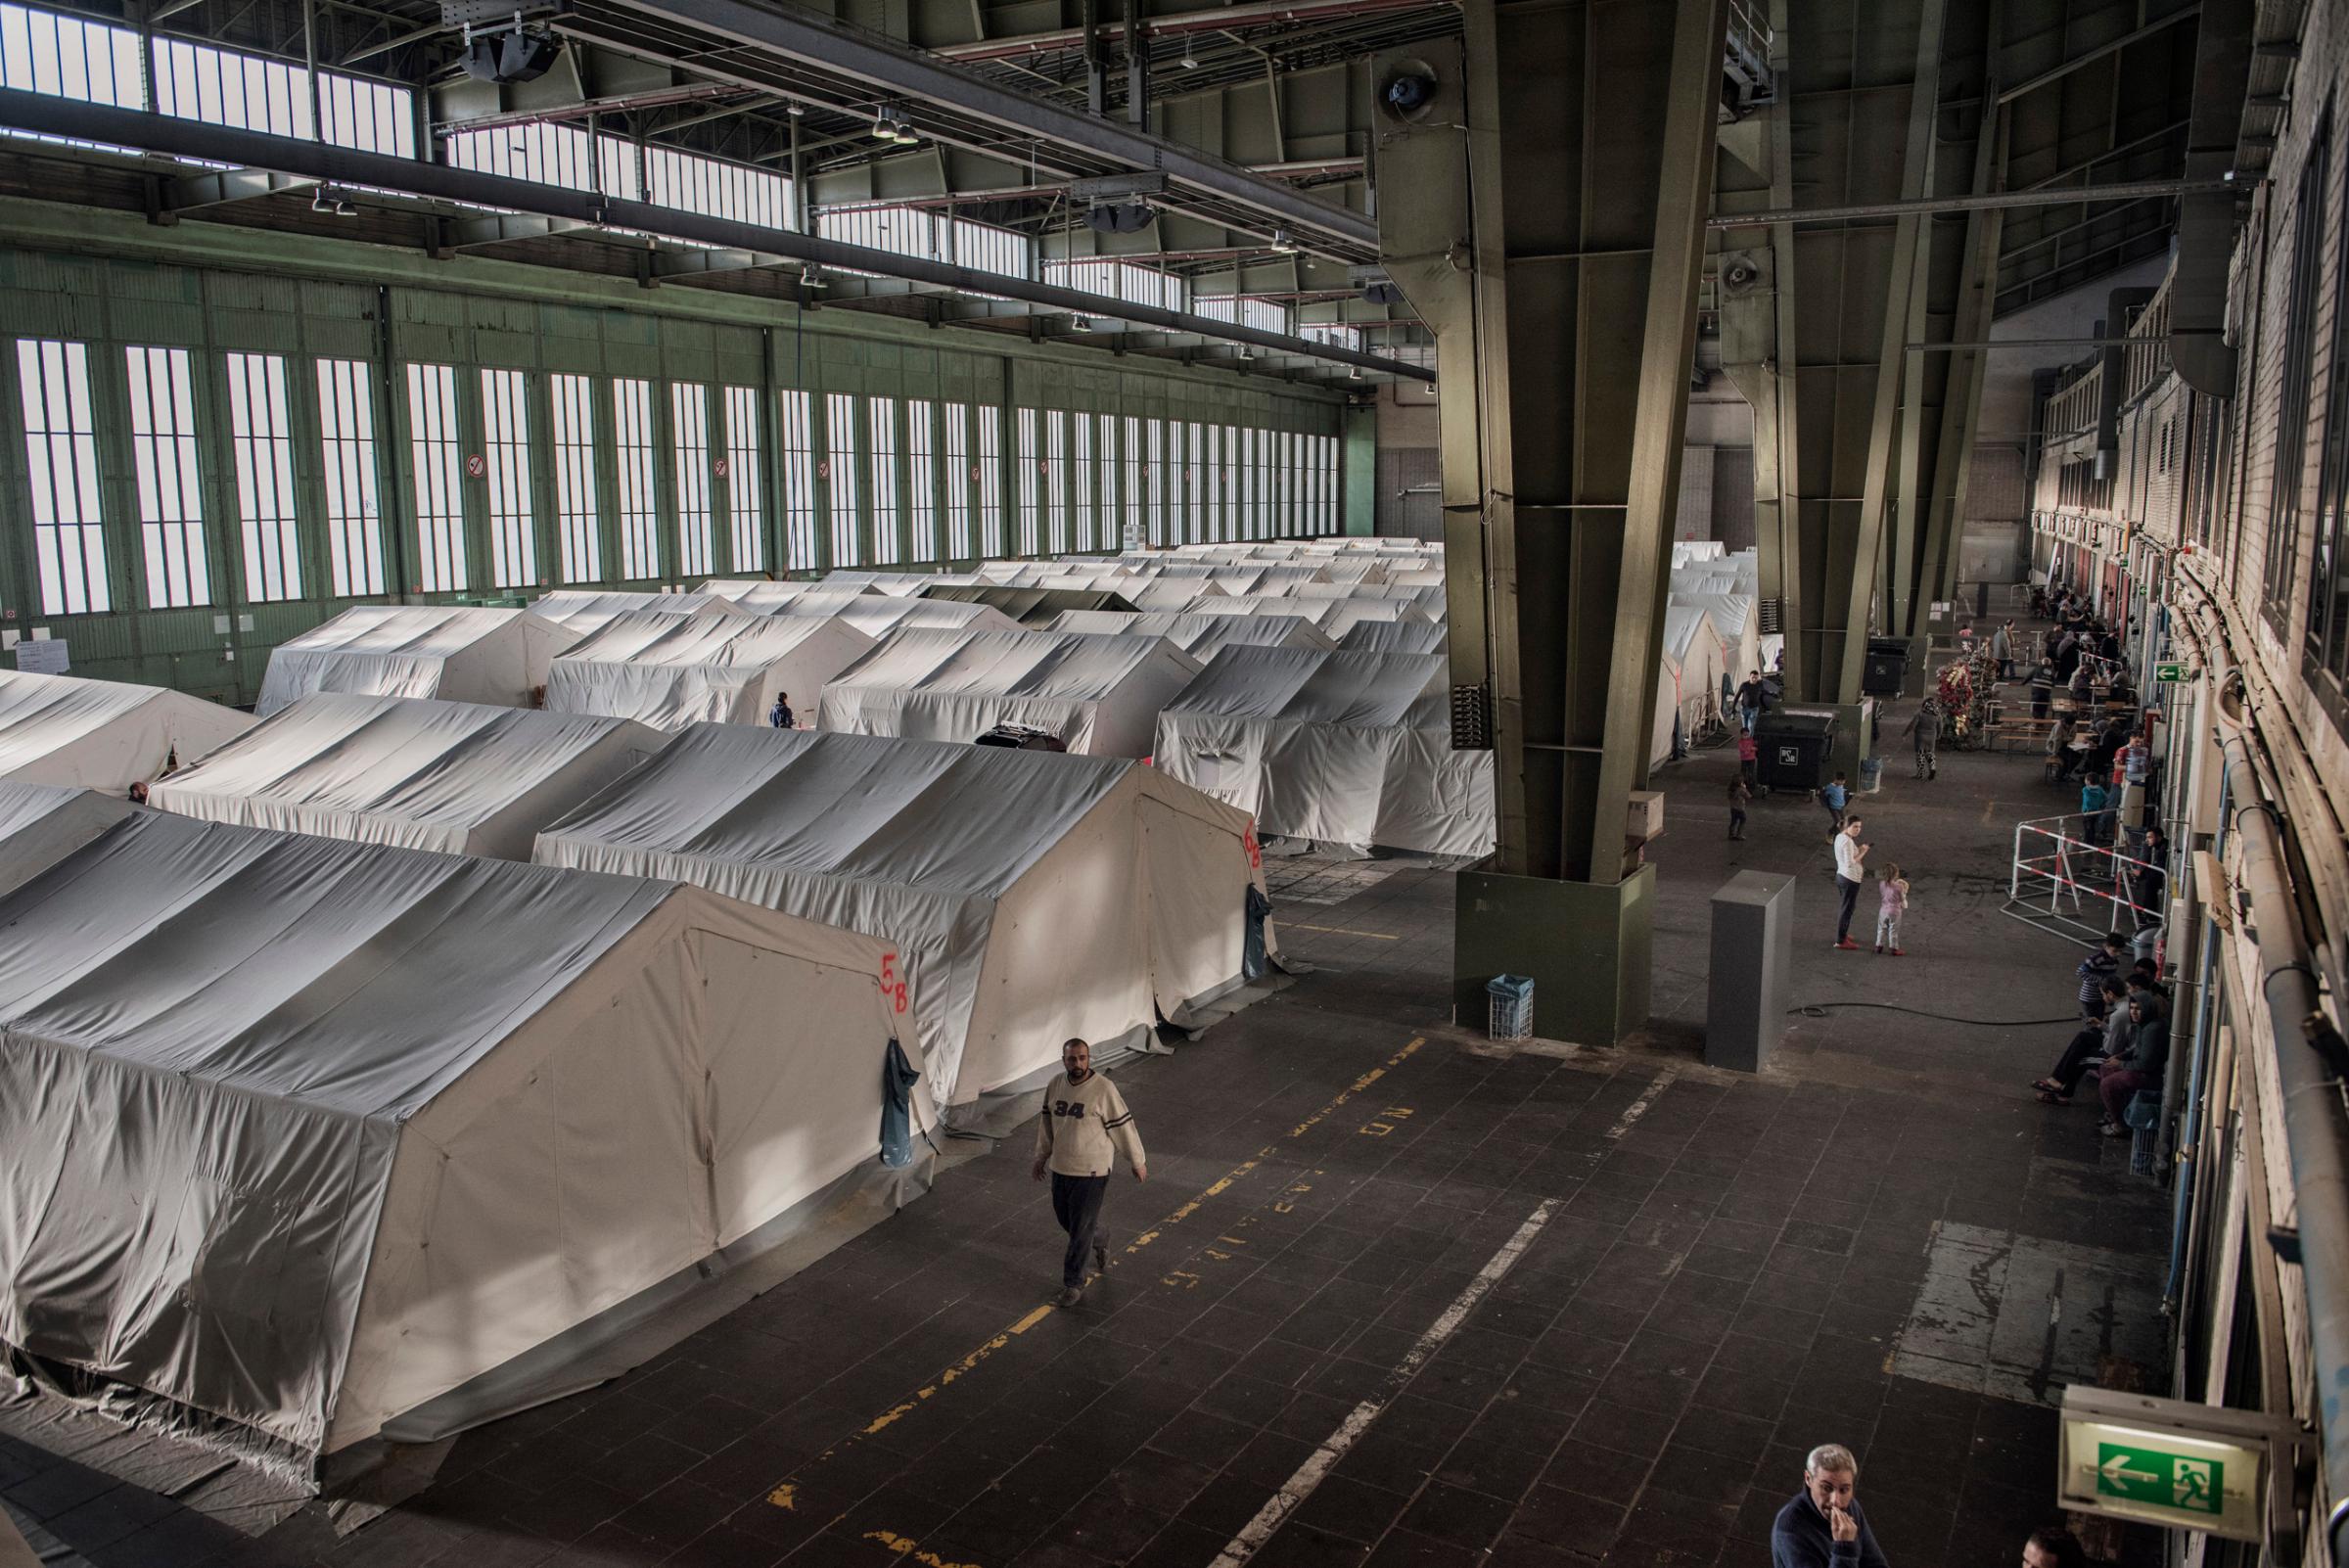 Cabins and tents are set up inside hangers of the former Berlin Tempelhof Airport, now to be used as temporary shelter for migrants, refugees and asylum seekers in Berlin. Germany, Dec. 2015. Used by the Nazis and once one of the world's largest buildings, today the Berlin Tempelhof Airport is being used as a major shelter for refugees and asylum seekers as Germany struggles to house the biggest influx of migrants since World War II.